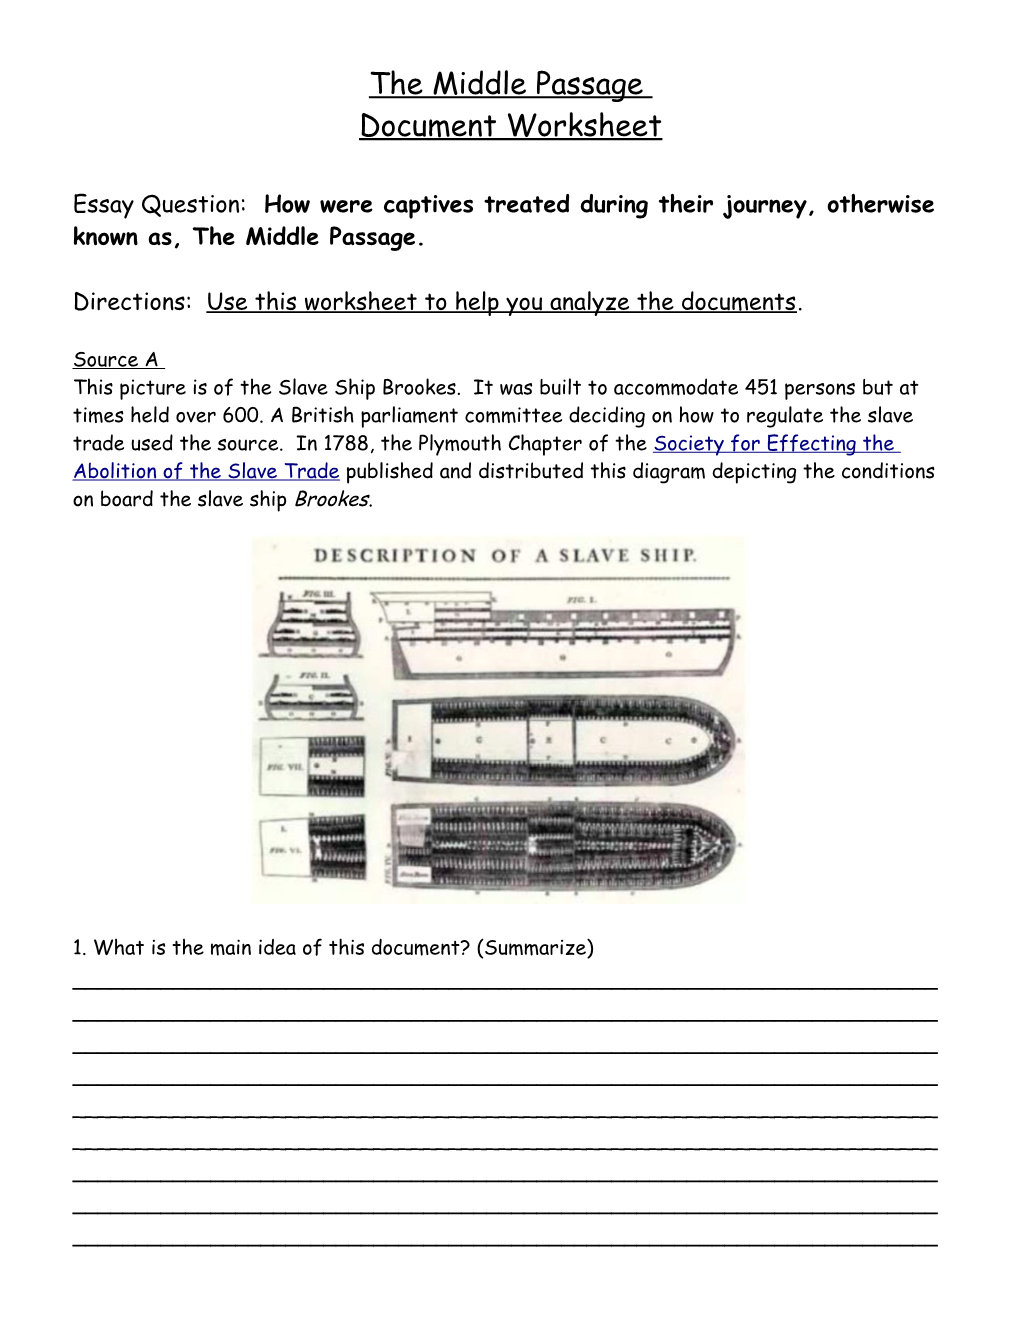 Directions: Use This Worksheet to Help You Analyze the Documents